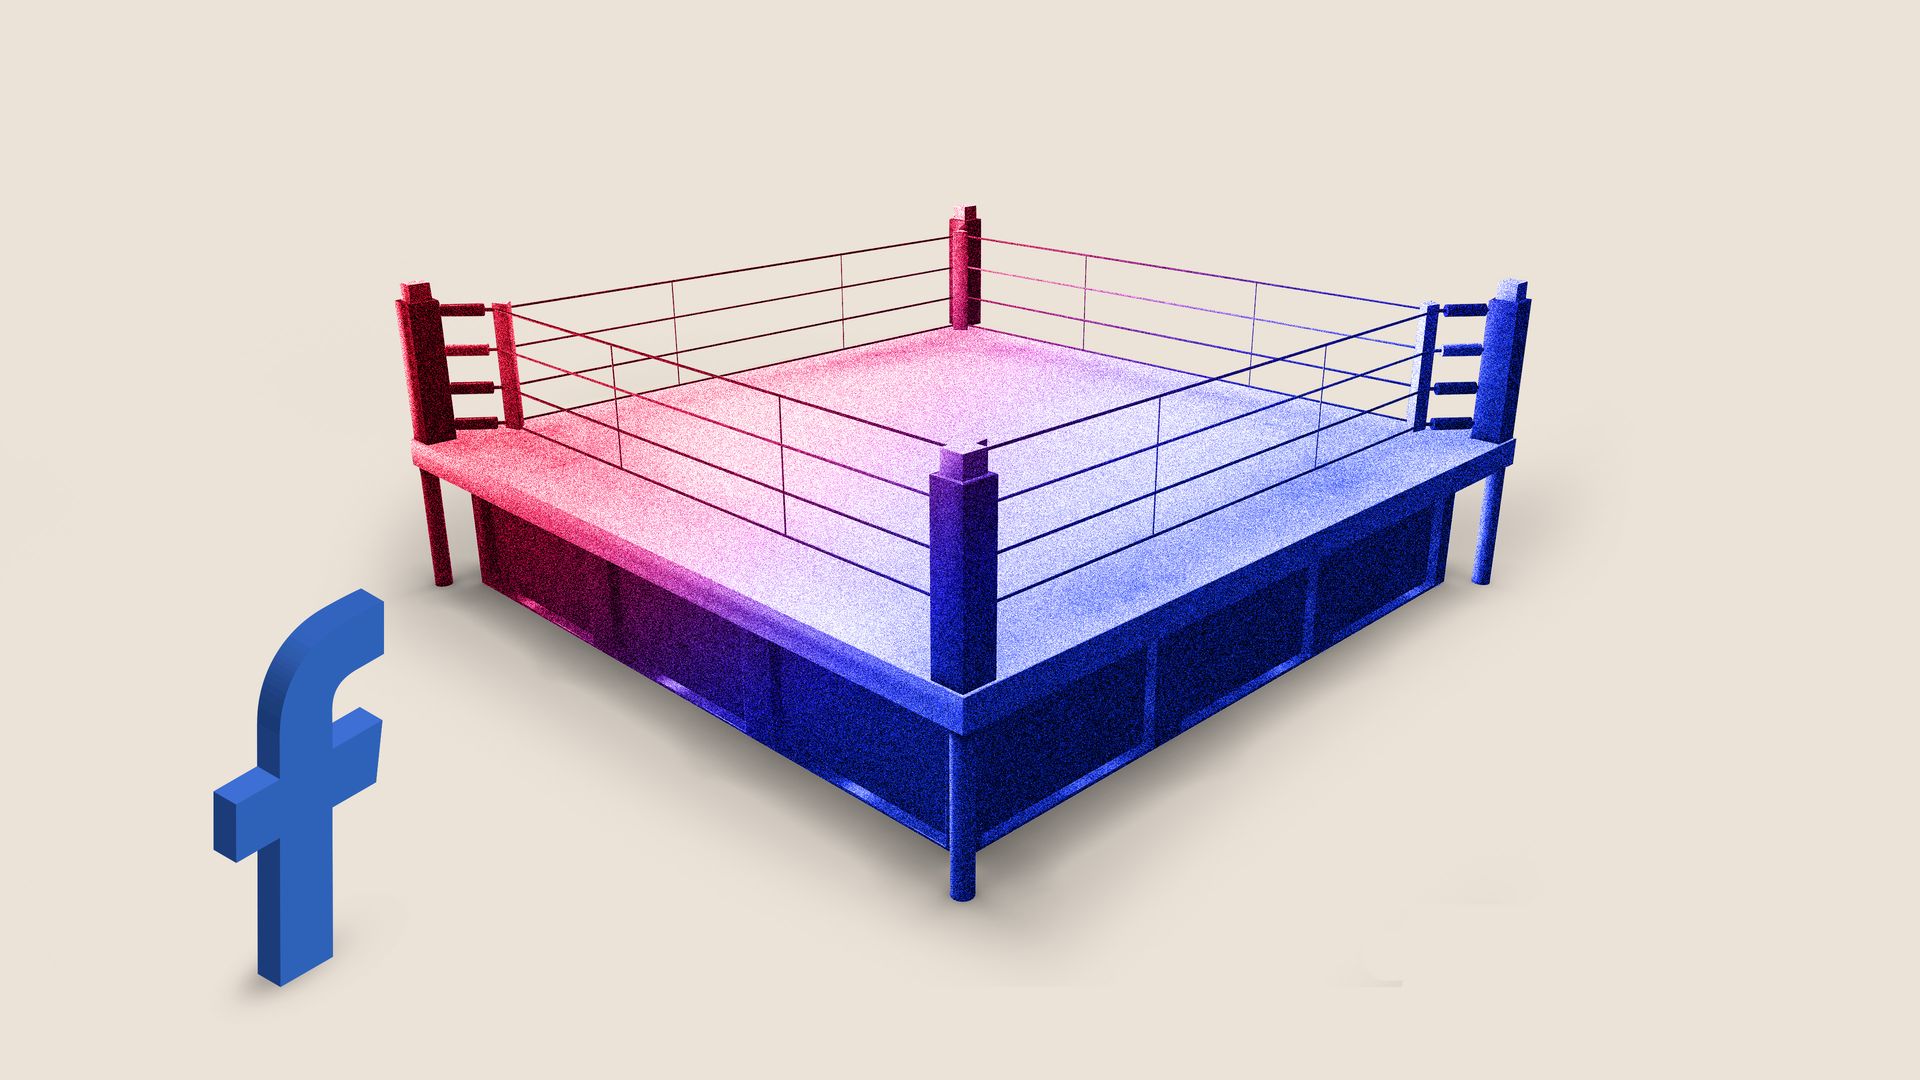 A Facebook "F" stands outside of a red and blue boxing ring